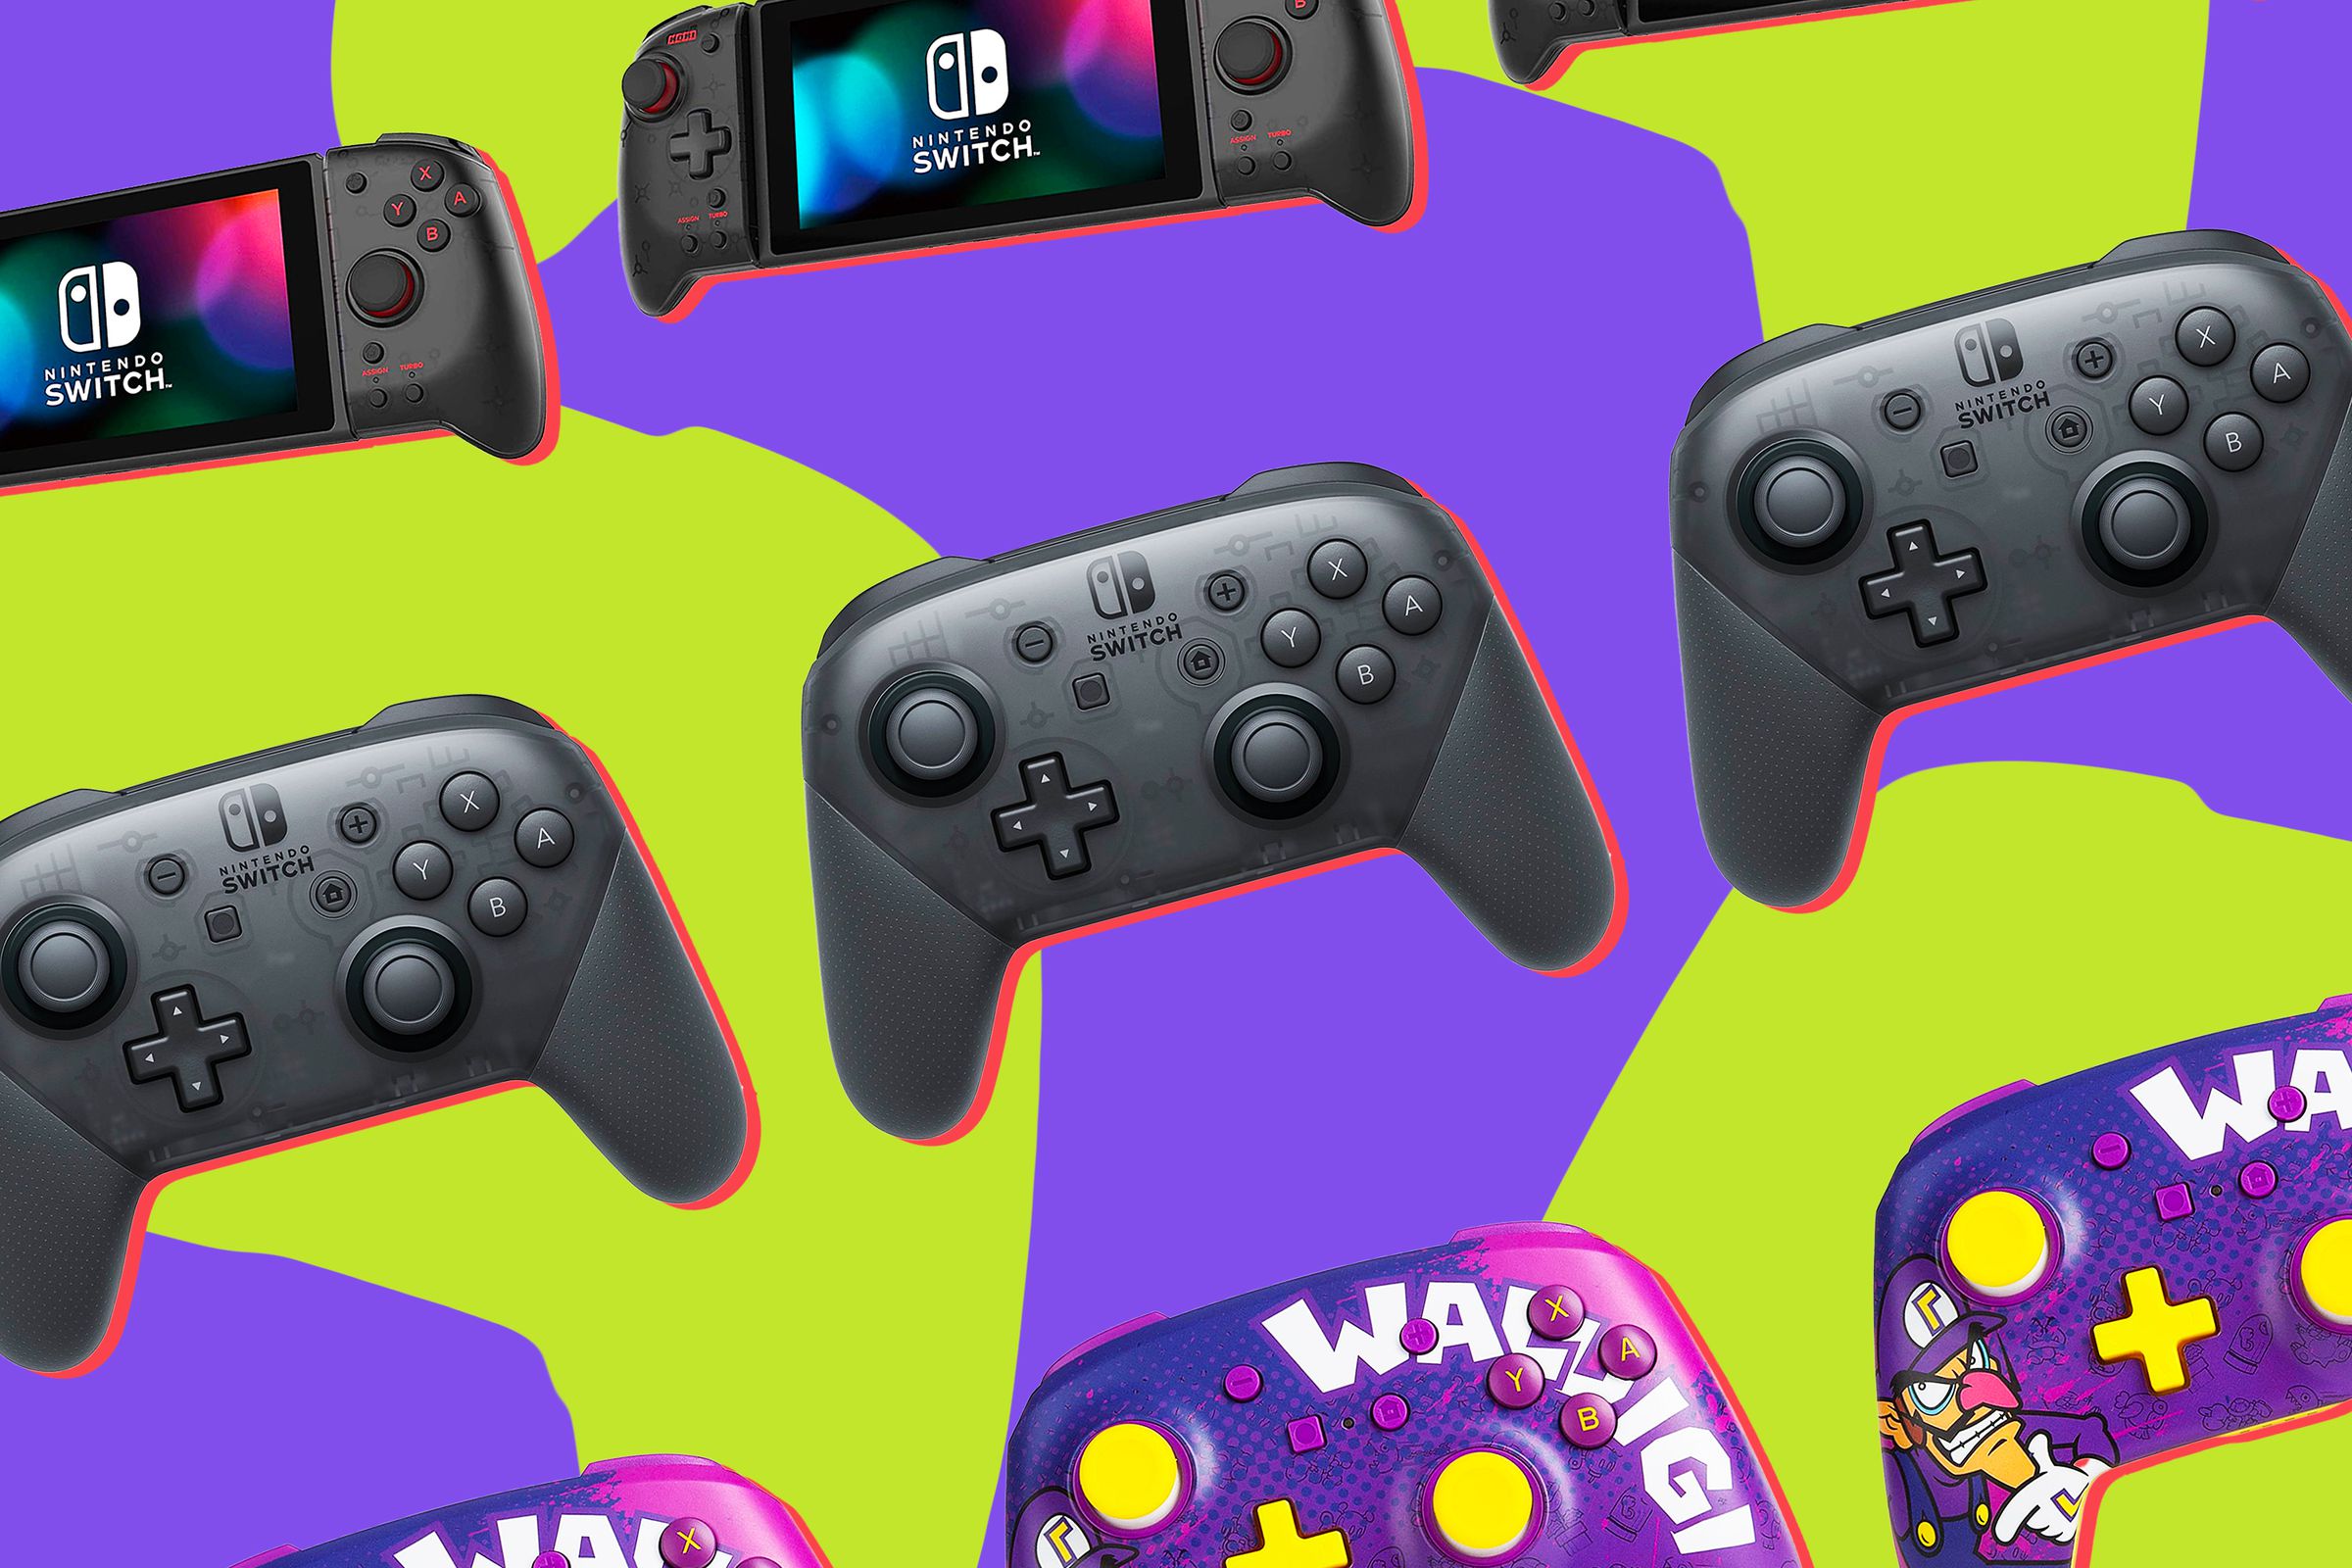 An illustration of a Nintendo Switch and various controllers against a purple and lime-green background.